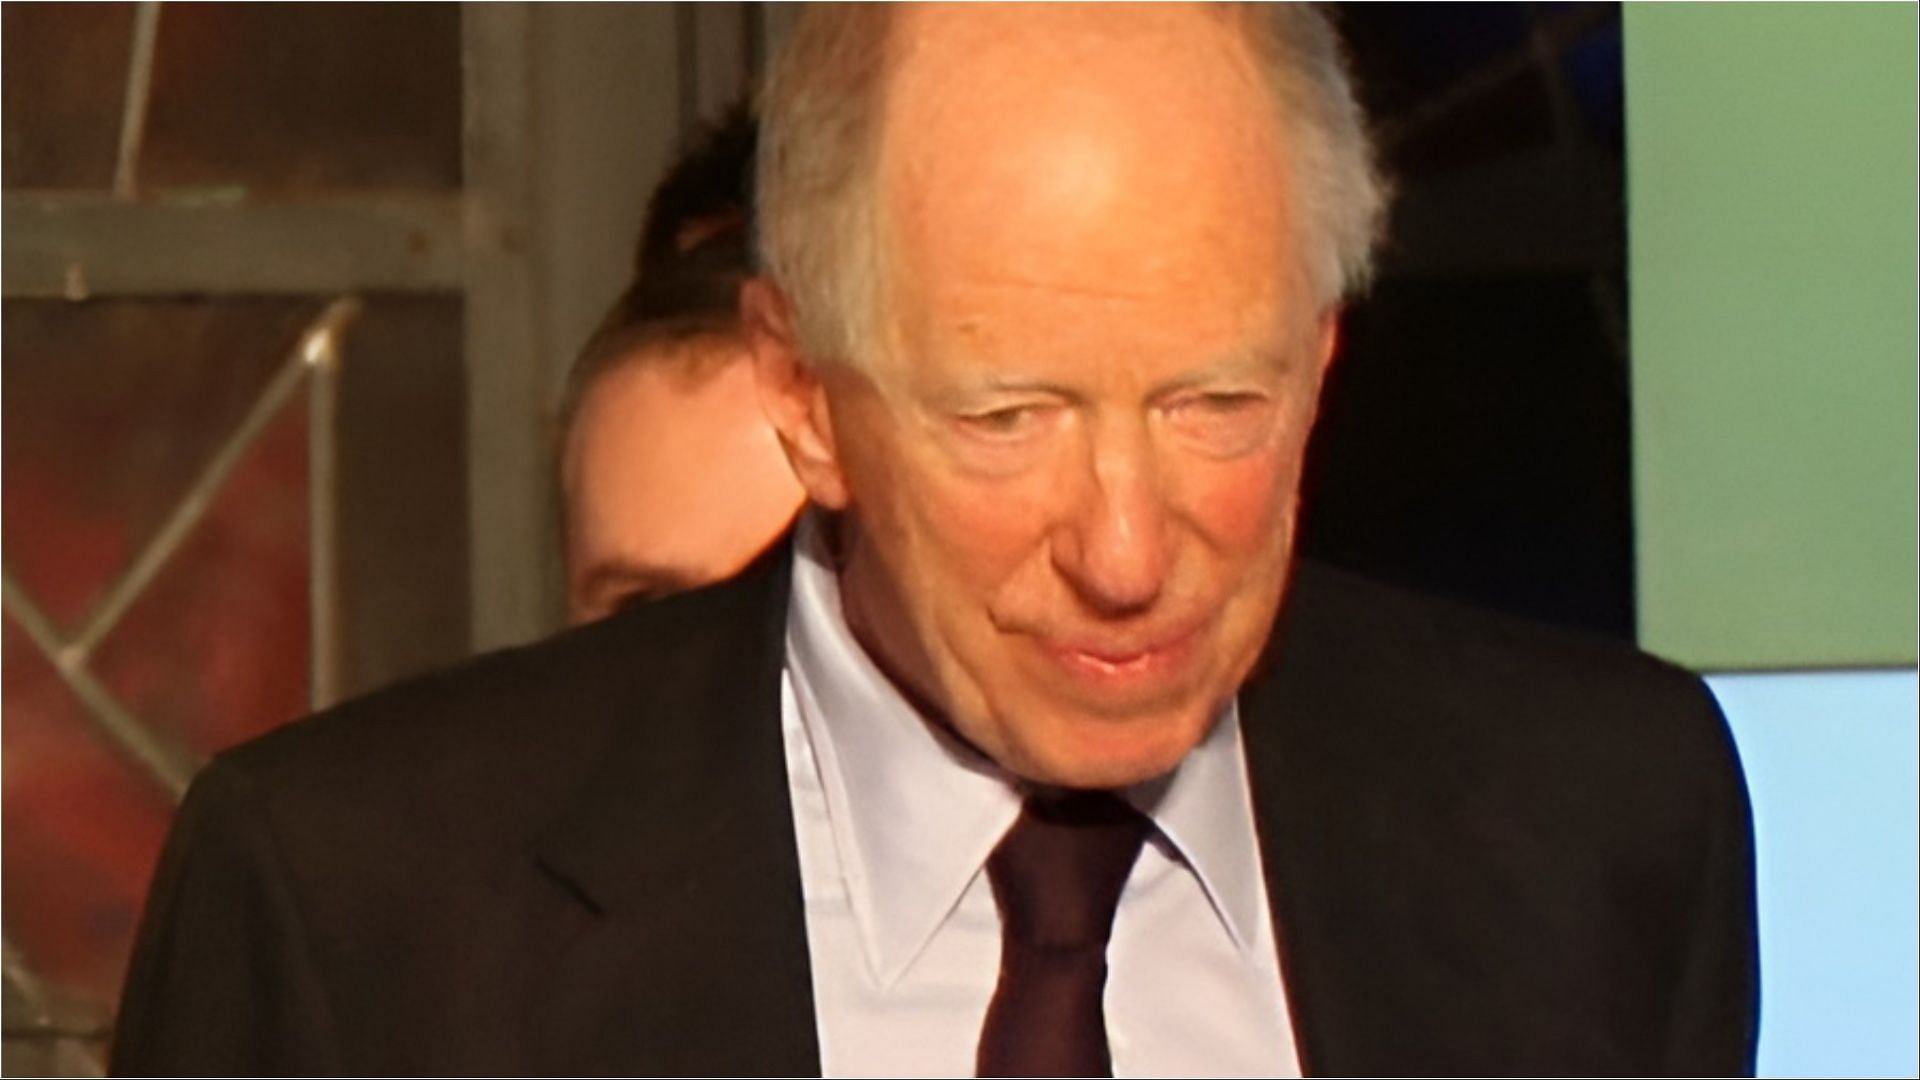 Jacob Rothschild has died at the age of 87 (Image via Wikimedia Commons)